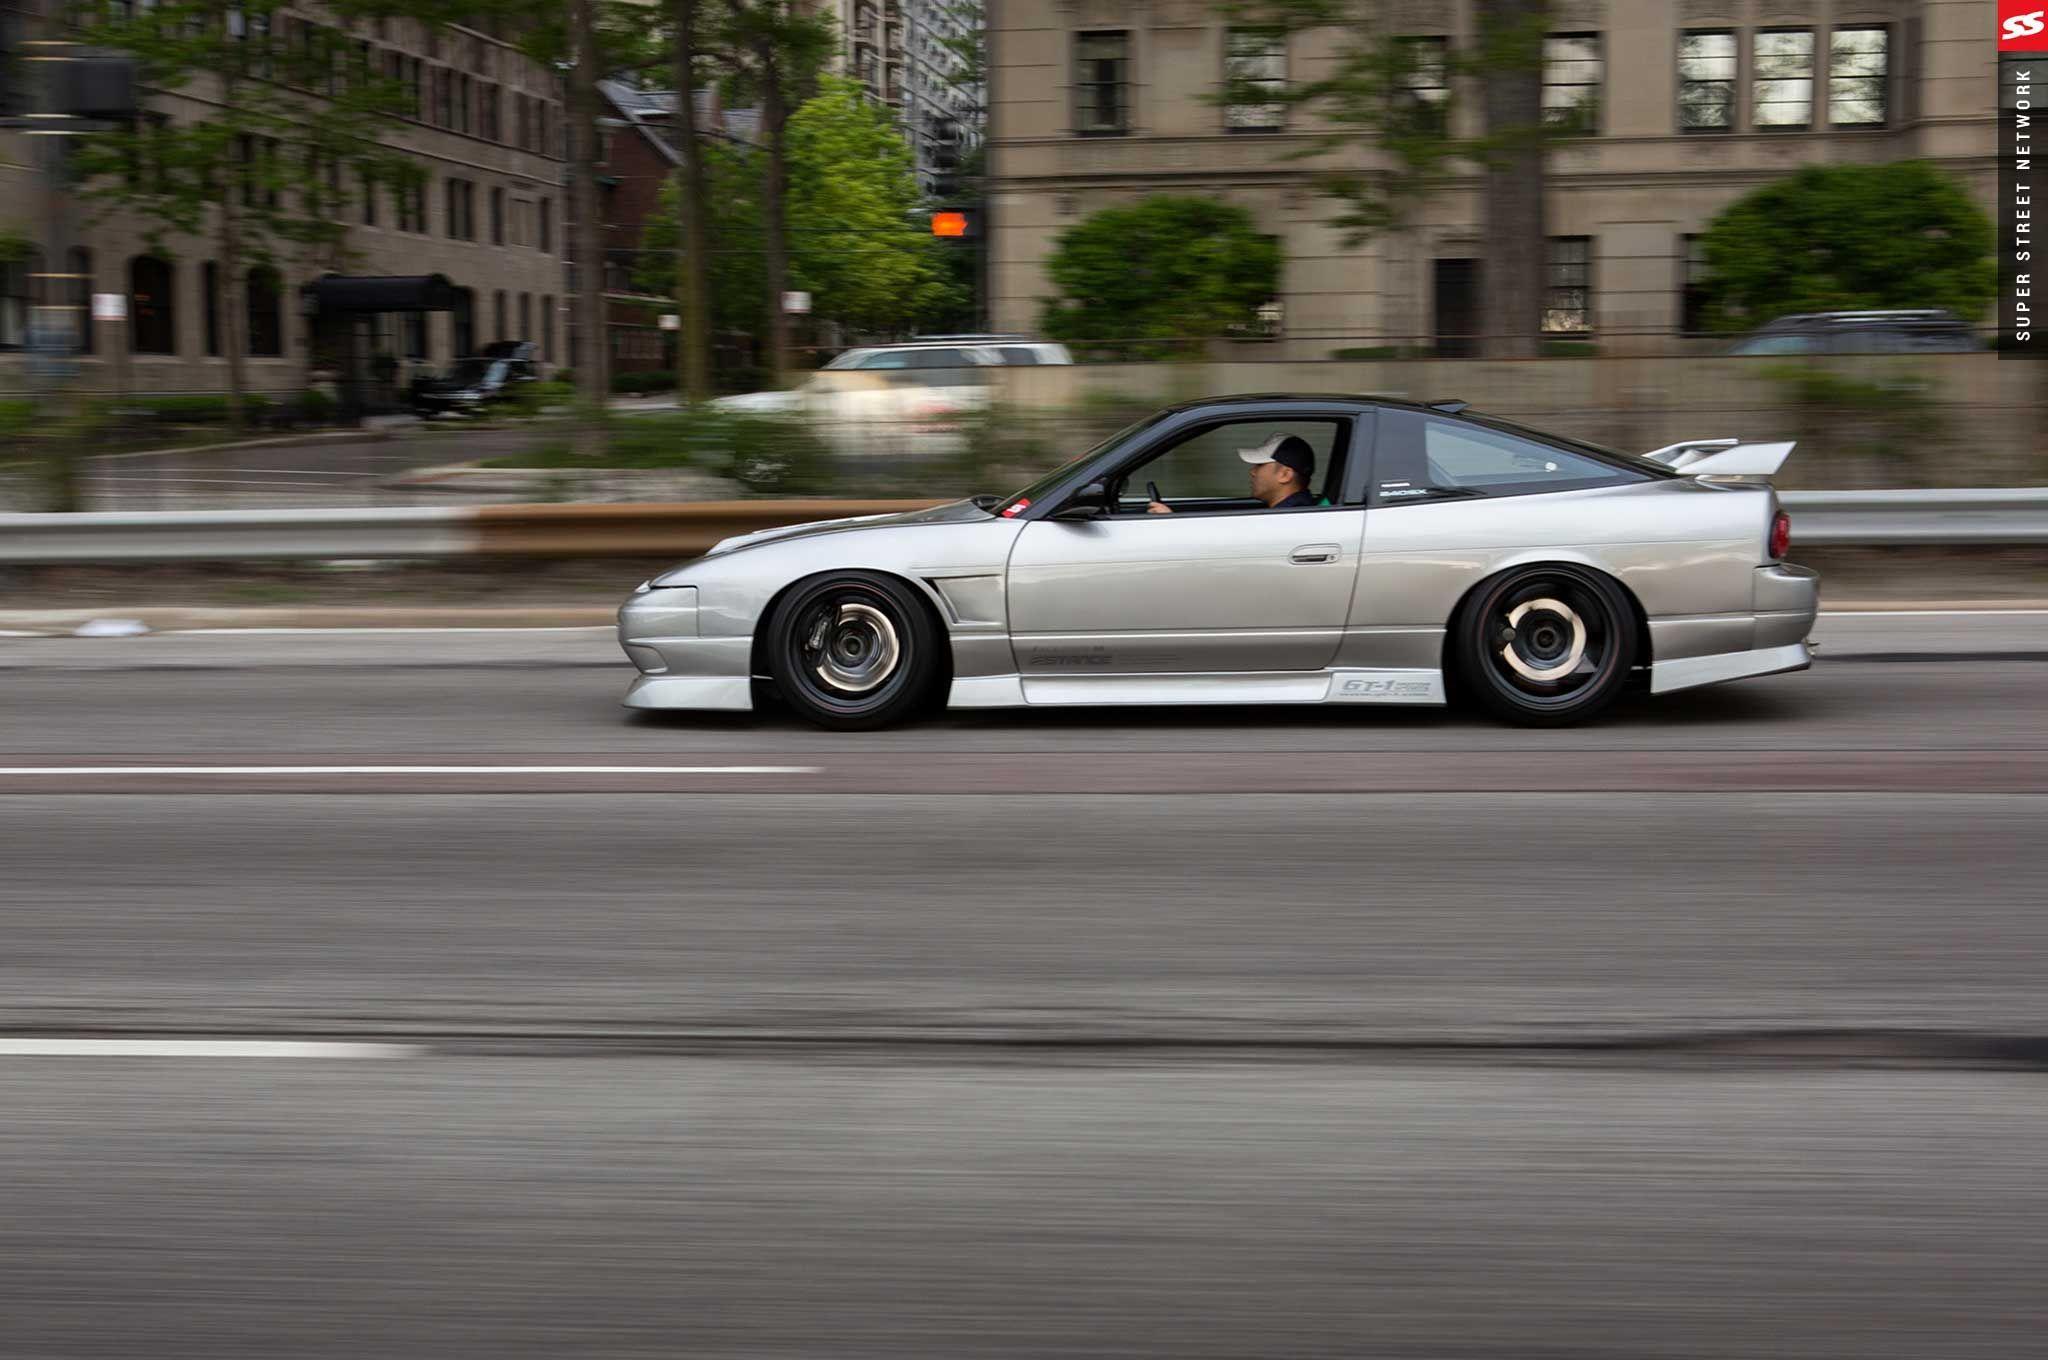 TF Works Period Correct Nissan S13 Photo & Image Gallery